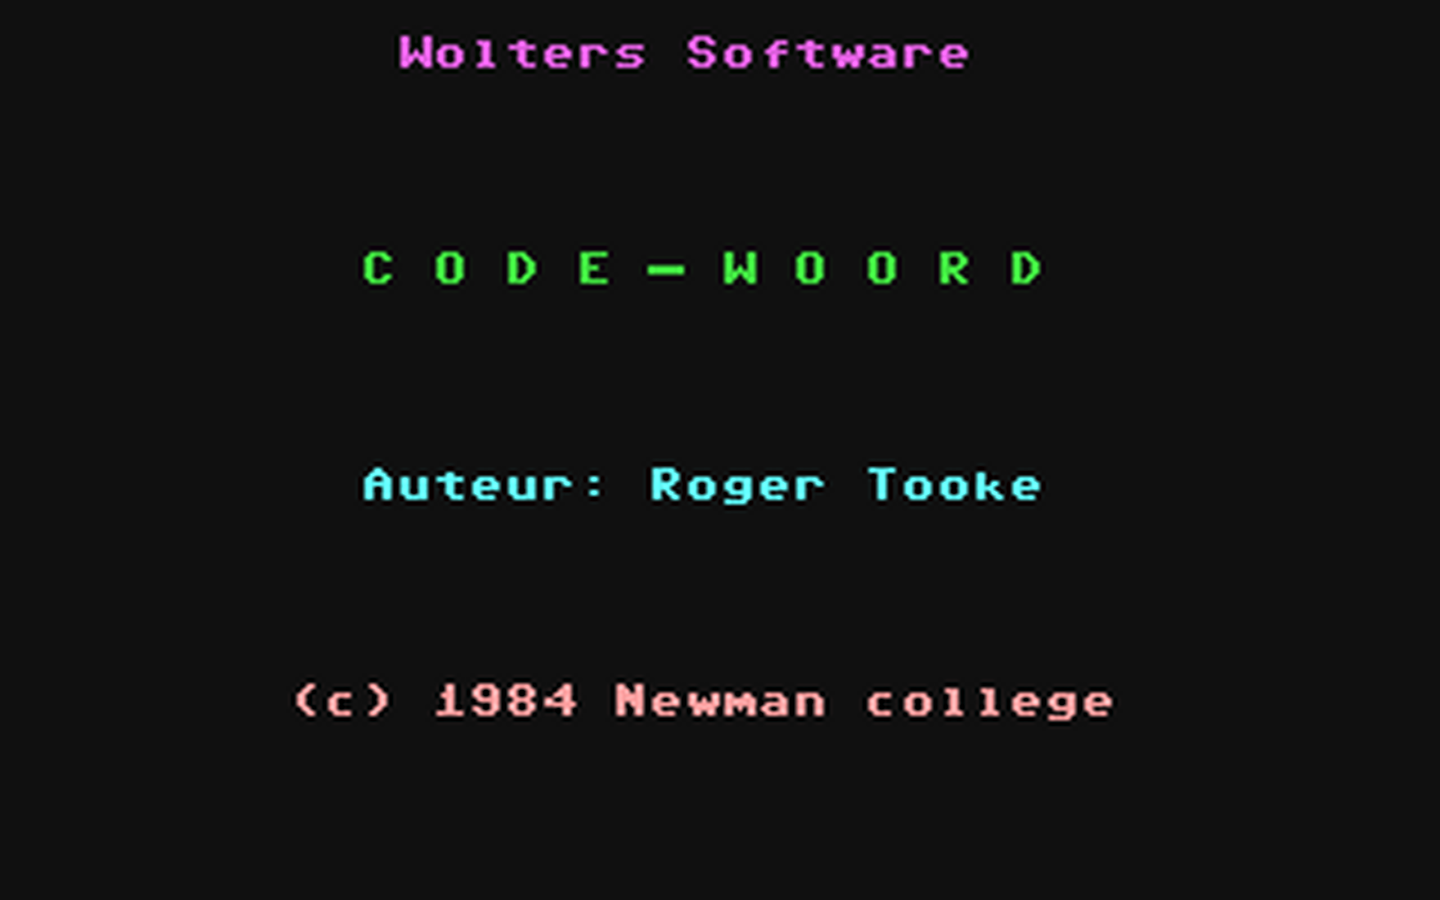 C64 GameBase Code-Woord Wolters_Software 1984